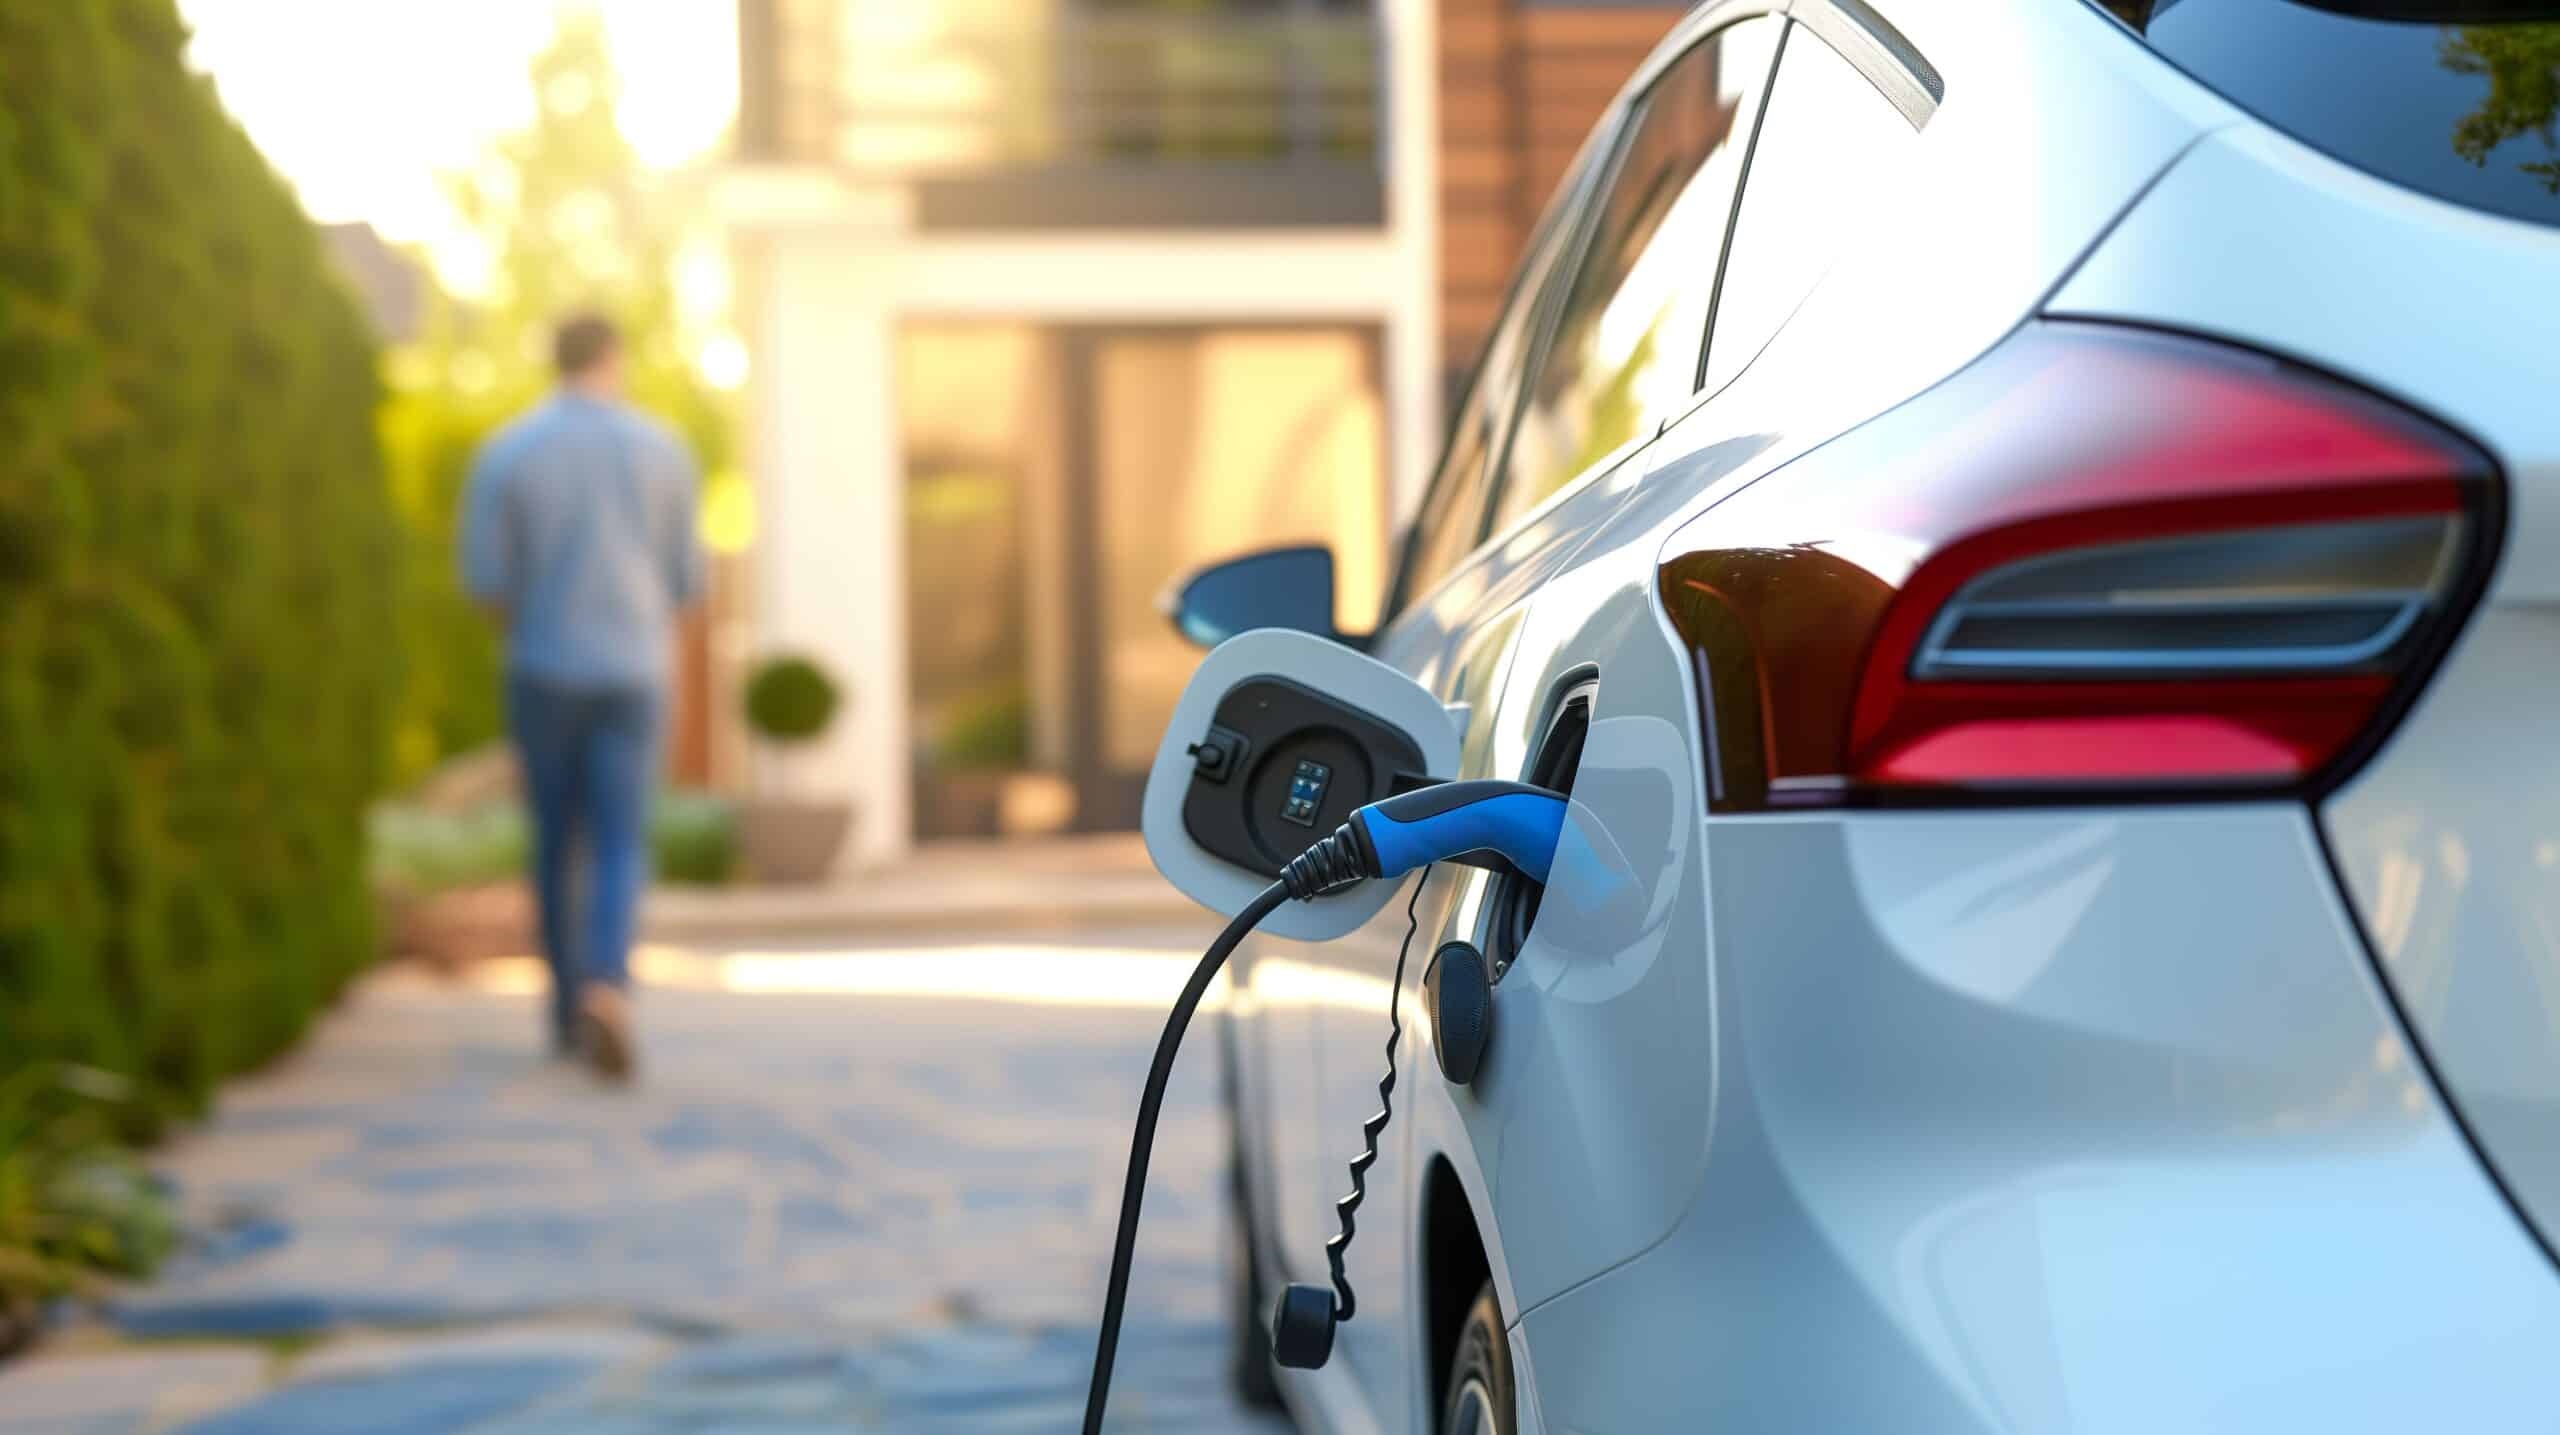 www.appr.com : What is required to charge an electric vehicle at home?